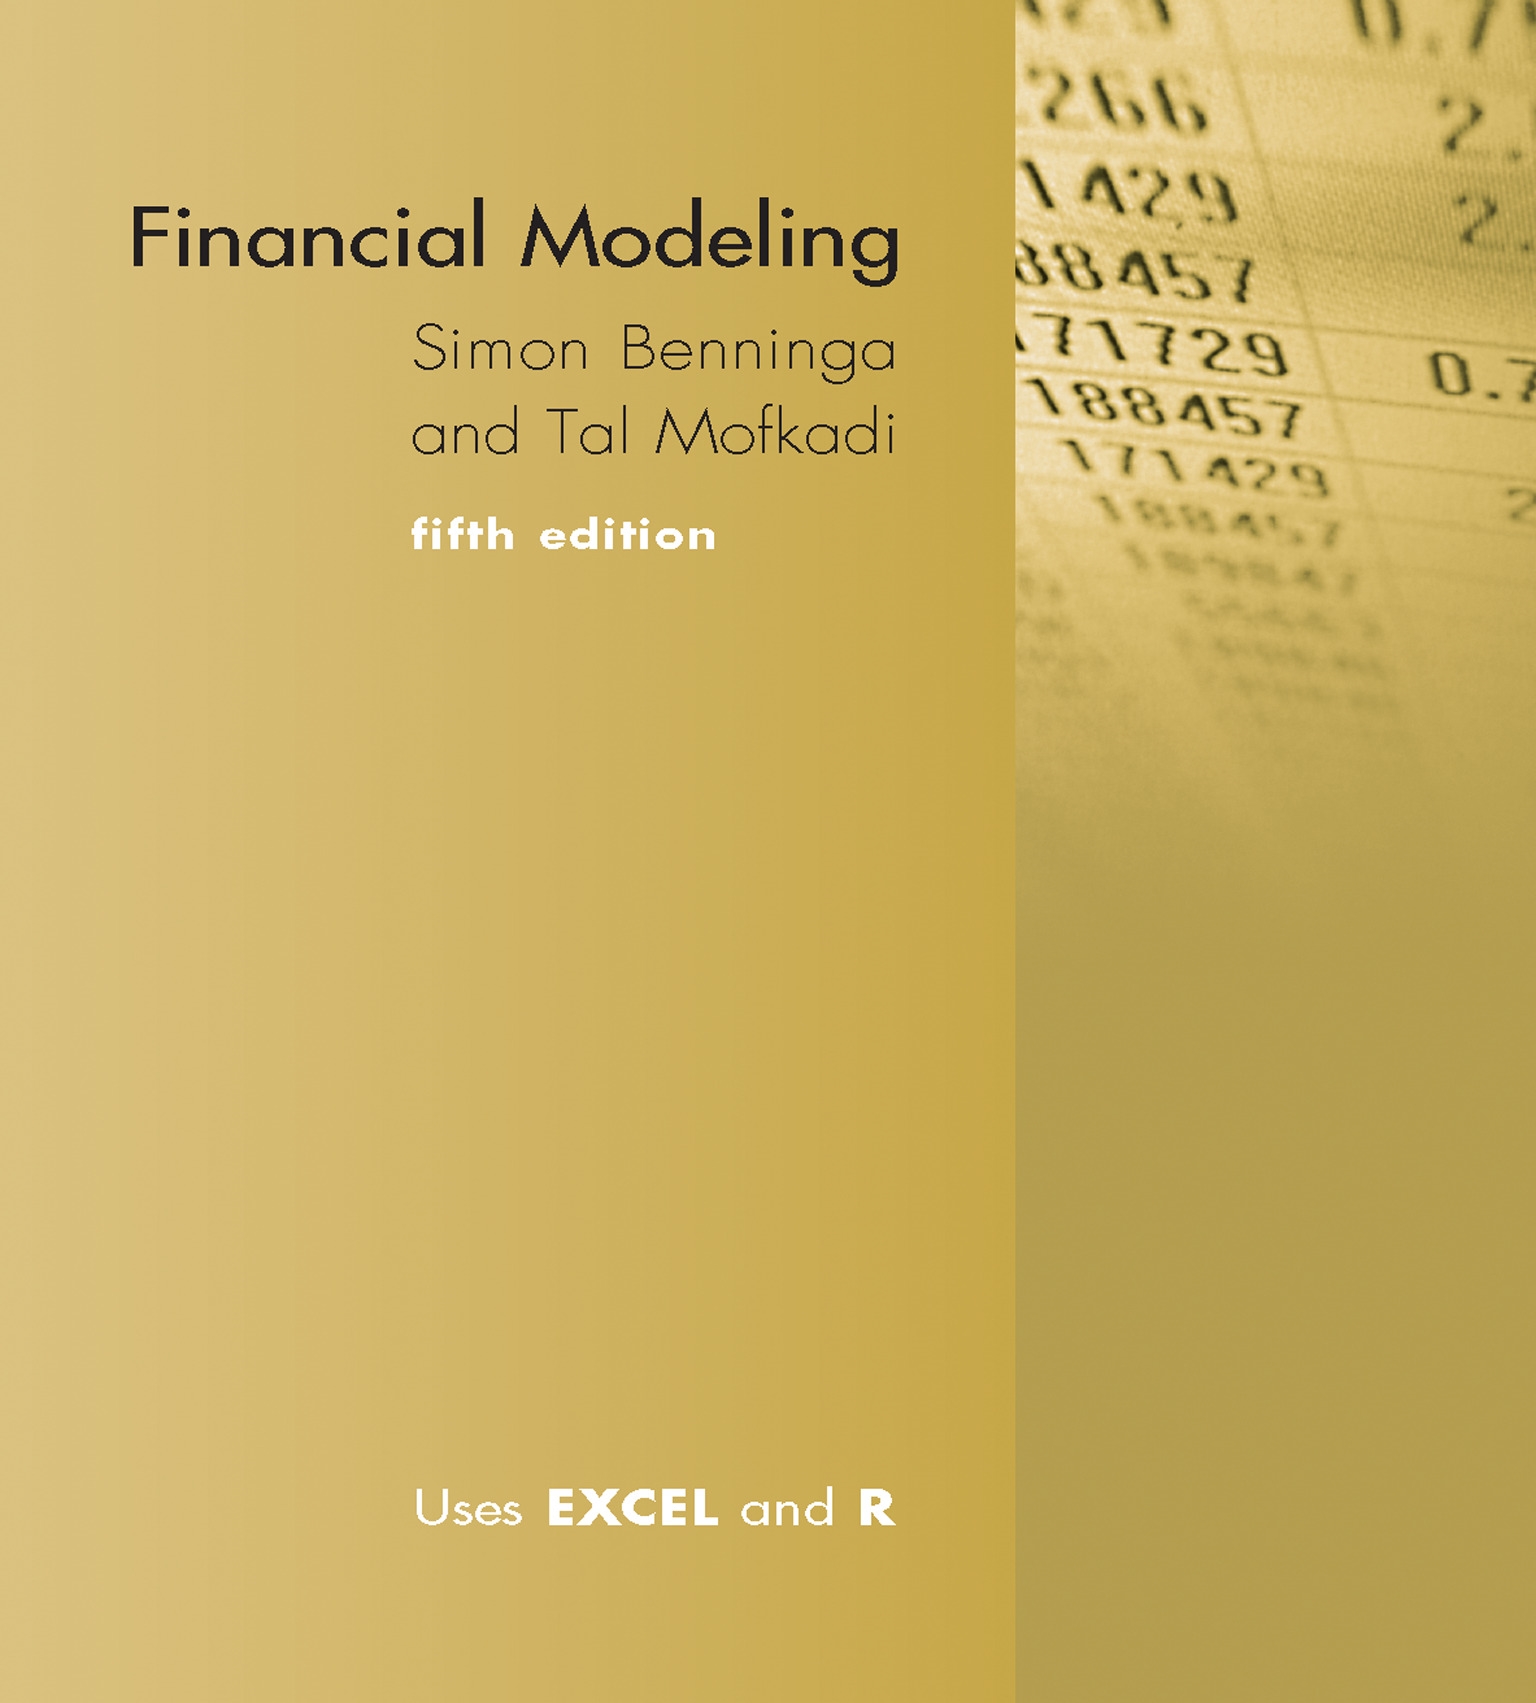 literature review on financial modeling